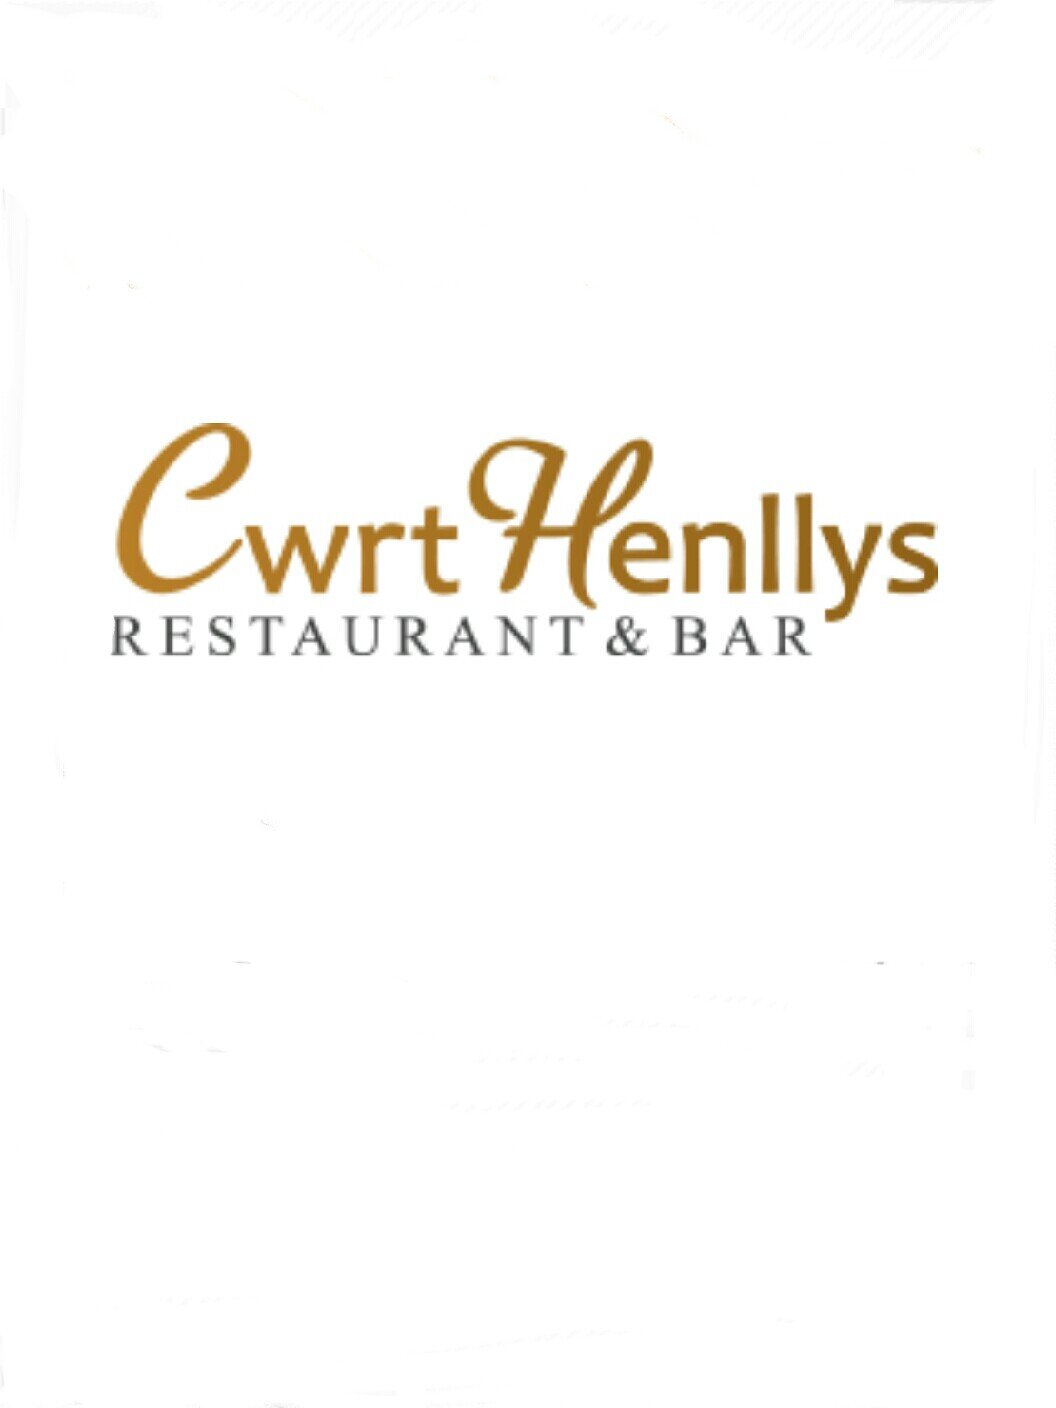 Cwrt Henllys Restaurant & Bar in Cwmbran. We offer lunchtime & evening menus & Sunday Carvery. We cater for weddings & parties with a band night every Friday.